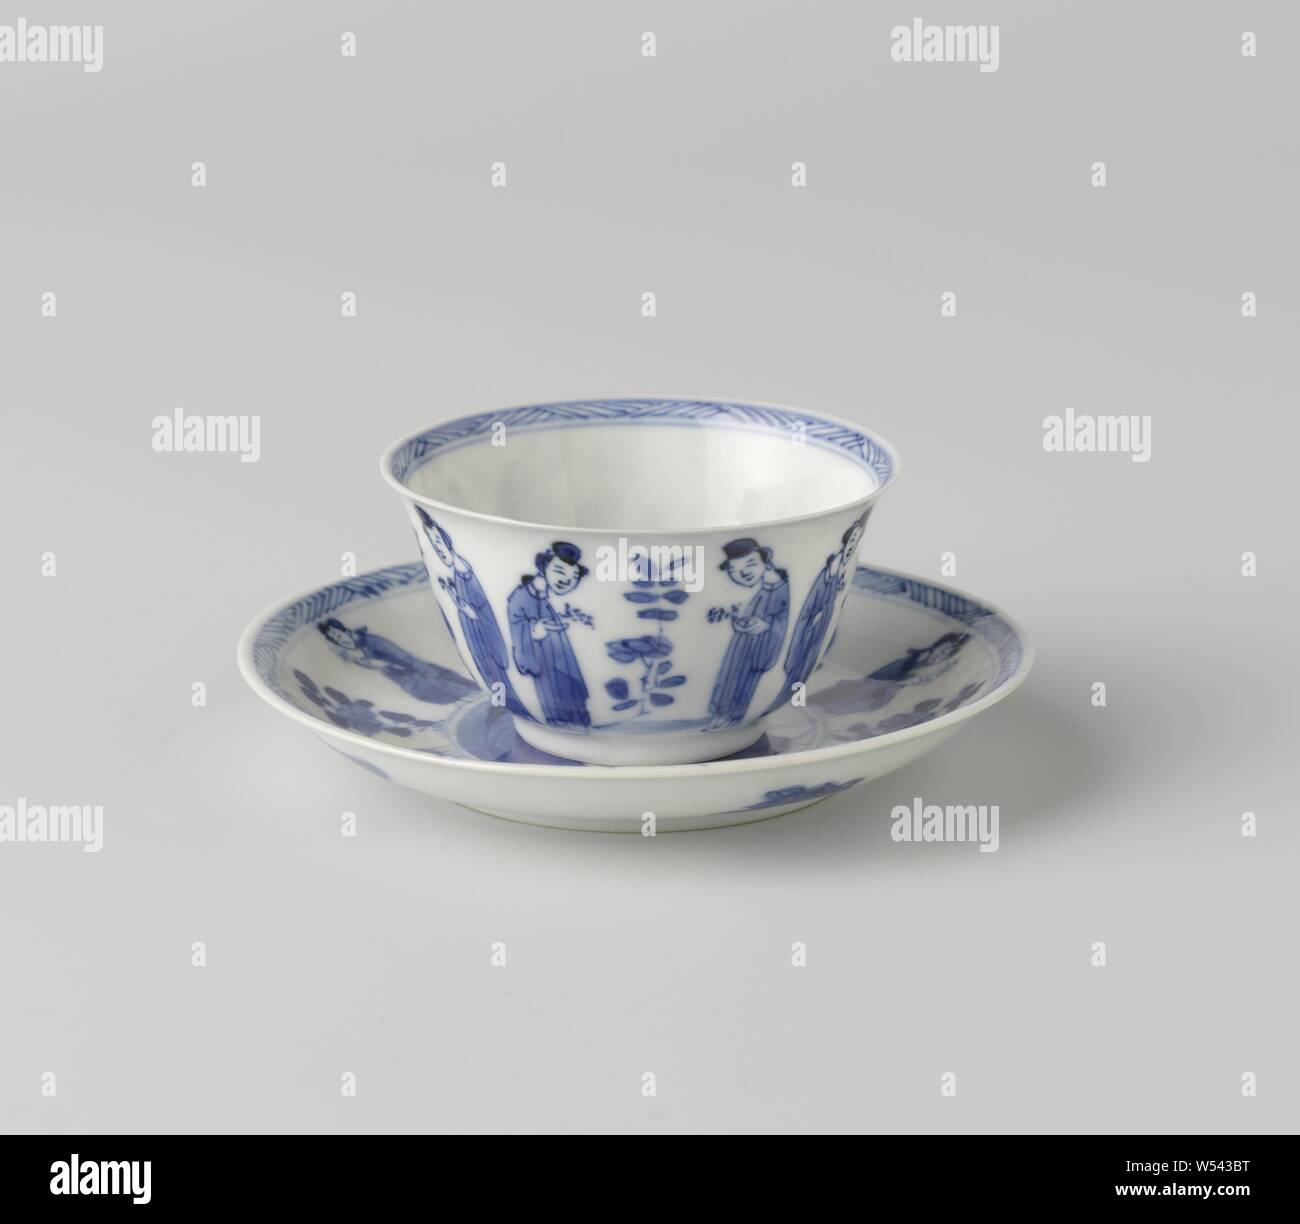 Cup and saucer with Chinese ladies and flower sprays, Porcelain cup and saucer, painted in underglaze blue. On the wall of the head two ladies with a twig in hand opposite each other with a plant in between them, at the bottom a sitting lady in front of a fence near a plant, the inner edge with zigzag pattern. On the plate of the dish a medallion with a seated lady at a rock with a plant, around the medallion two ladies with a twig in hand by a flower branch, the edge with a zigzag pattern, the back with four valuables (pearl, artemisia leaf, shell, music stone). Saucer marked on the underside Stock Photo